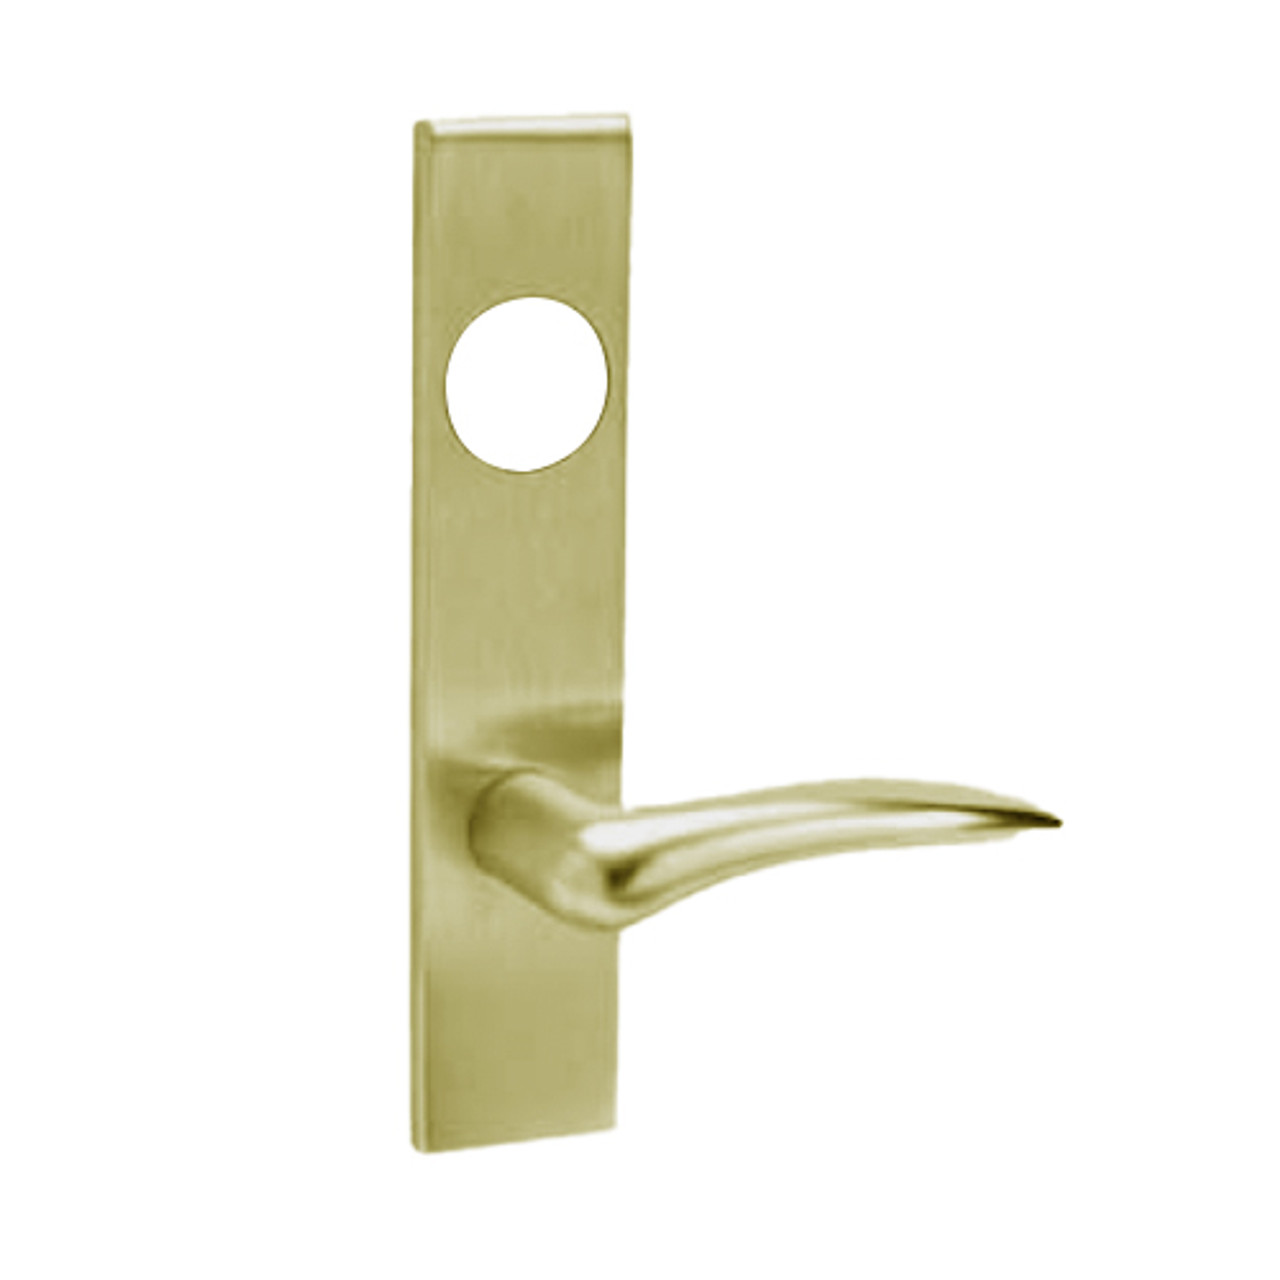 ML2067-DSR-606-LC-LH Corbin Russwin ML2000 Series Mortise Apartment Locksets with Dirke Lever in Satin Brass